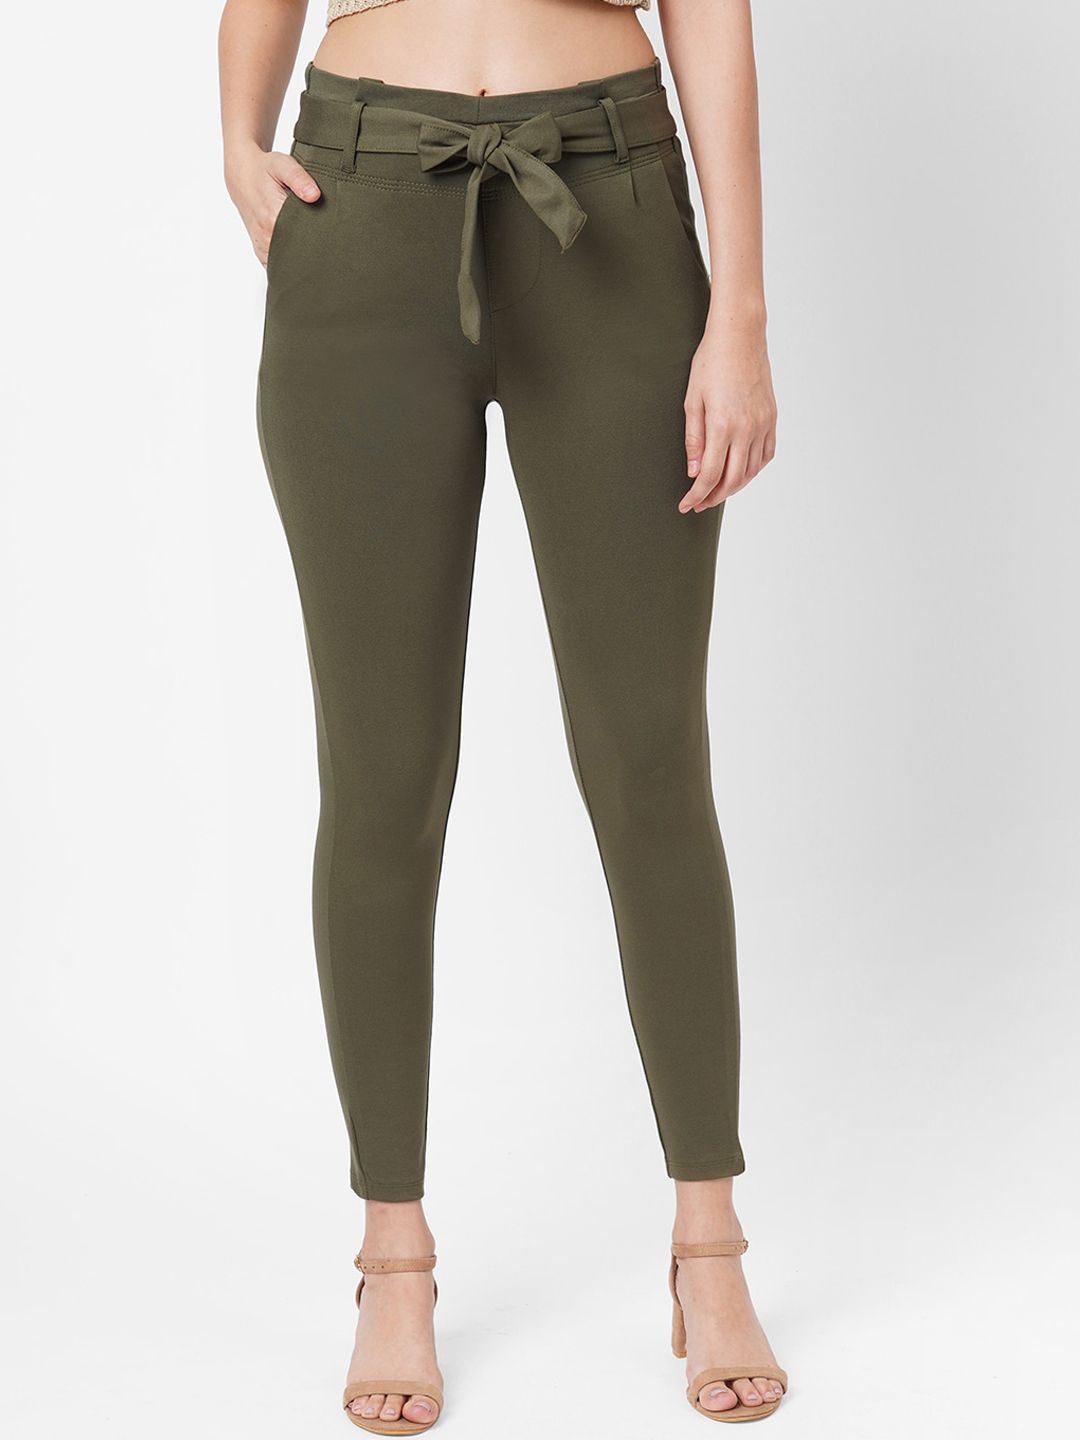 Kraus Jeans Women Olive Green Slim Fit High-Rise Trousers Price in India